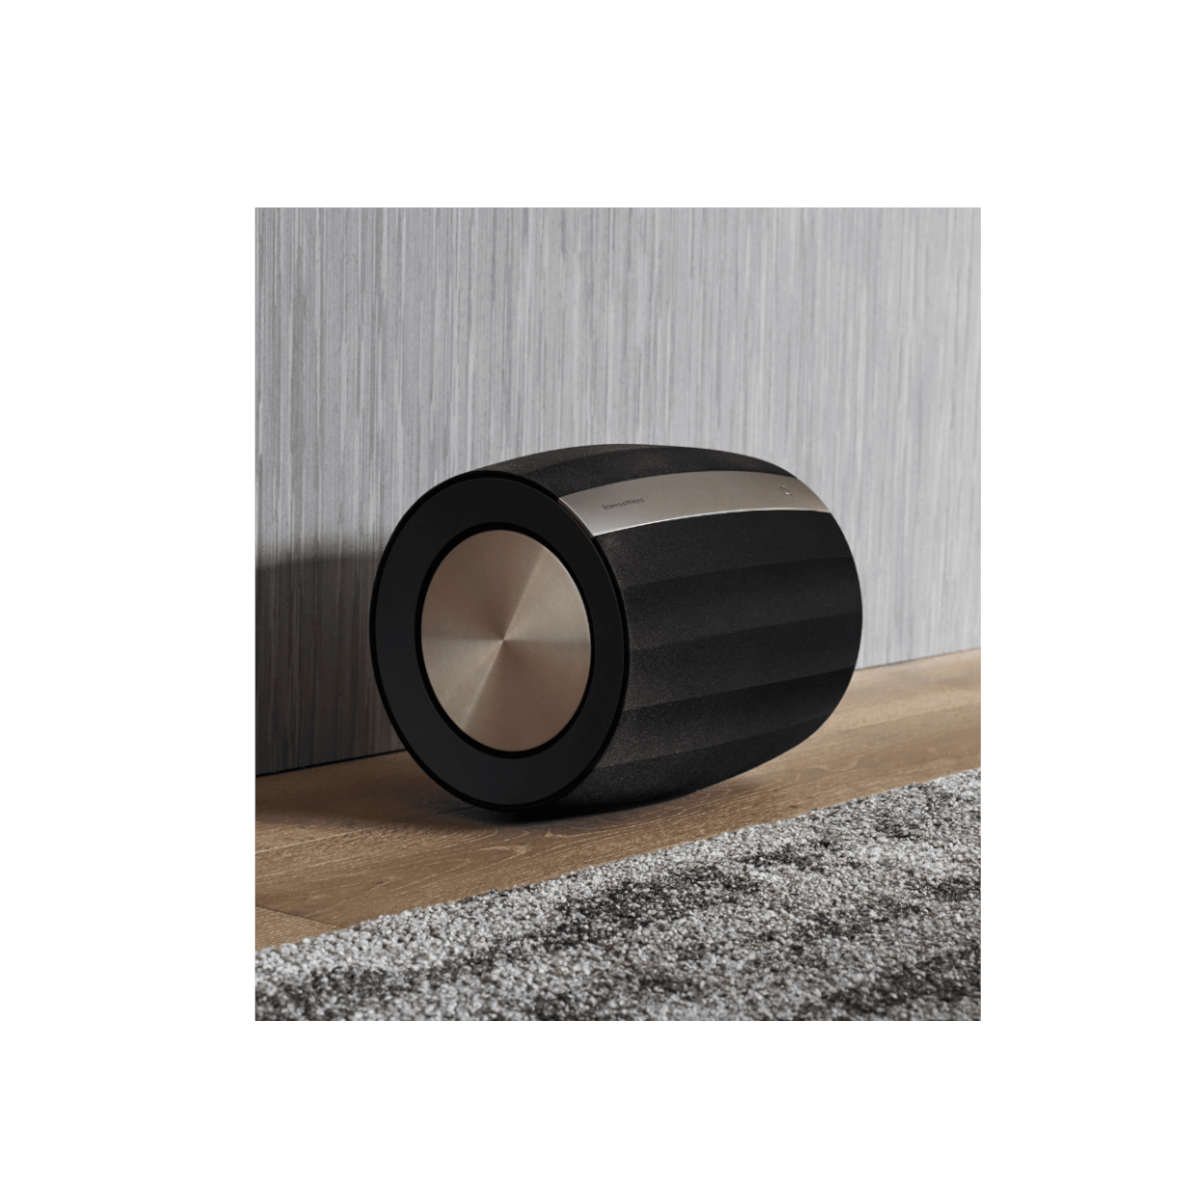 Bowers & Wilkins (B&W) Formation Bass - Ooberpad India